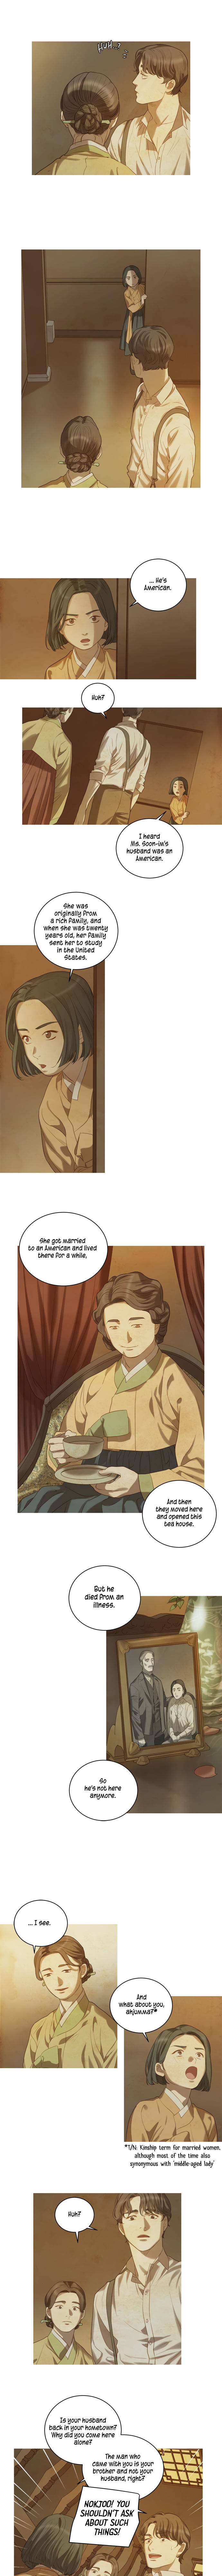 Gorae Byul - The Gyeongseong Mermaid - Chapter 14 Page 8